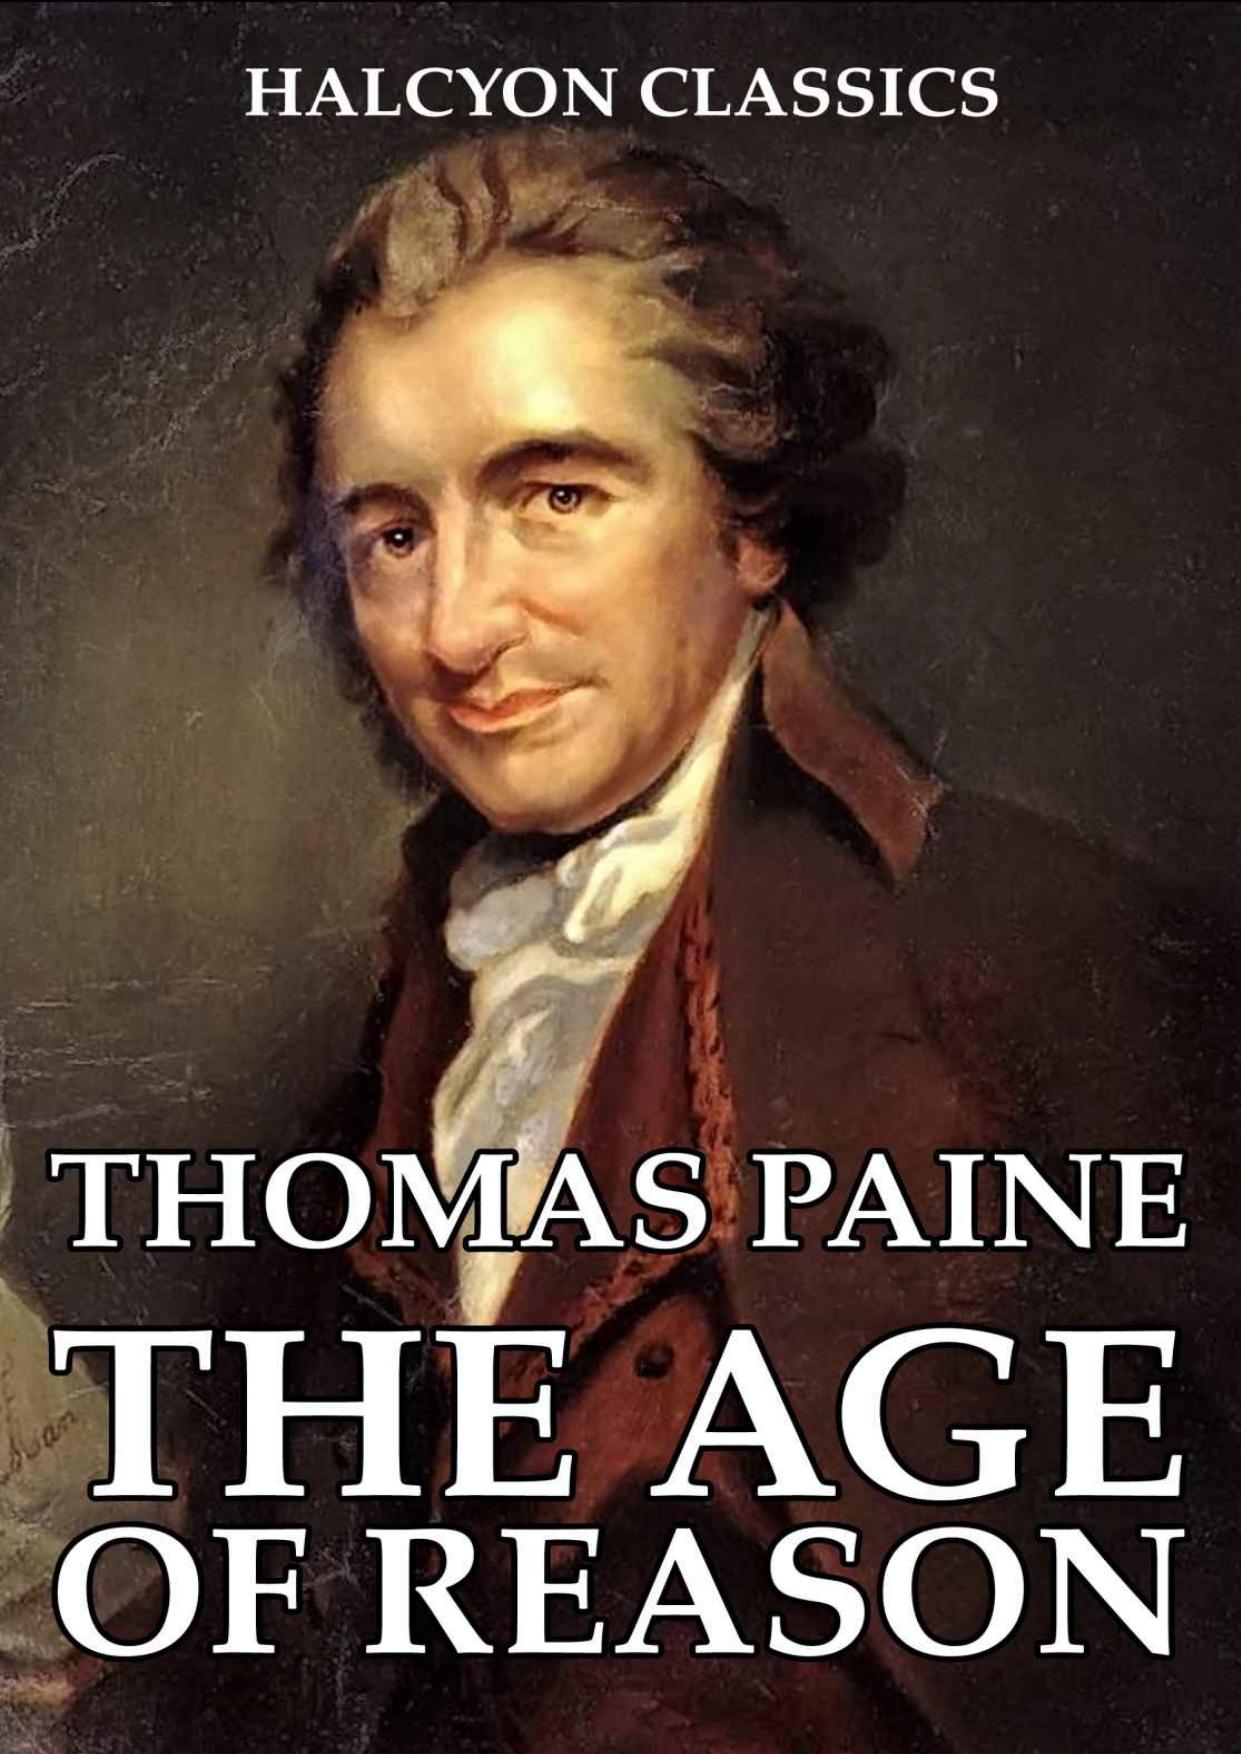 The Age of Reason and Other Works by Thomas Paine (Unexpurgated Edition) (Halcyon Classics)